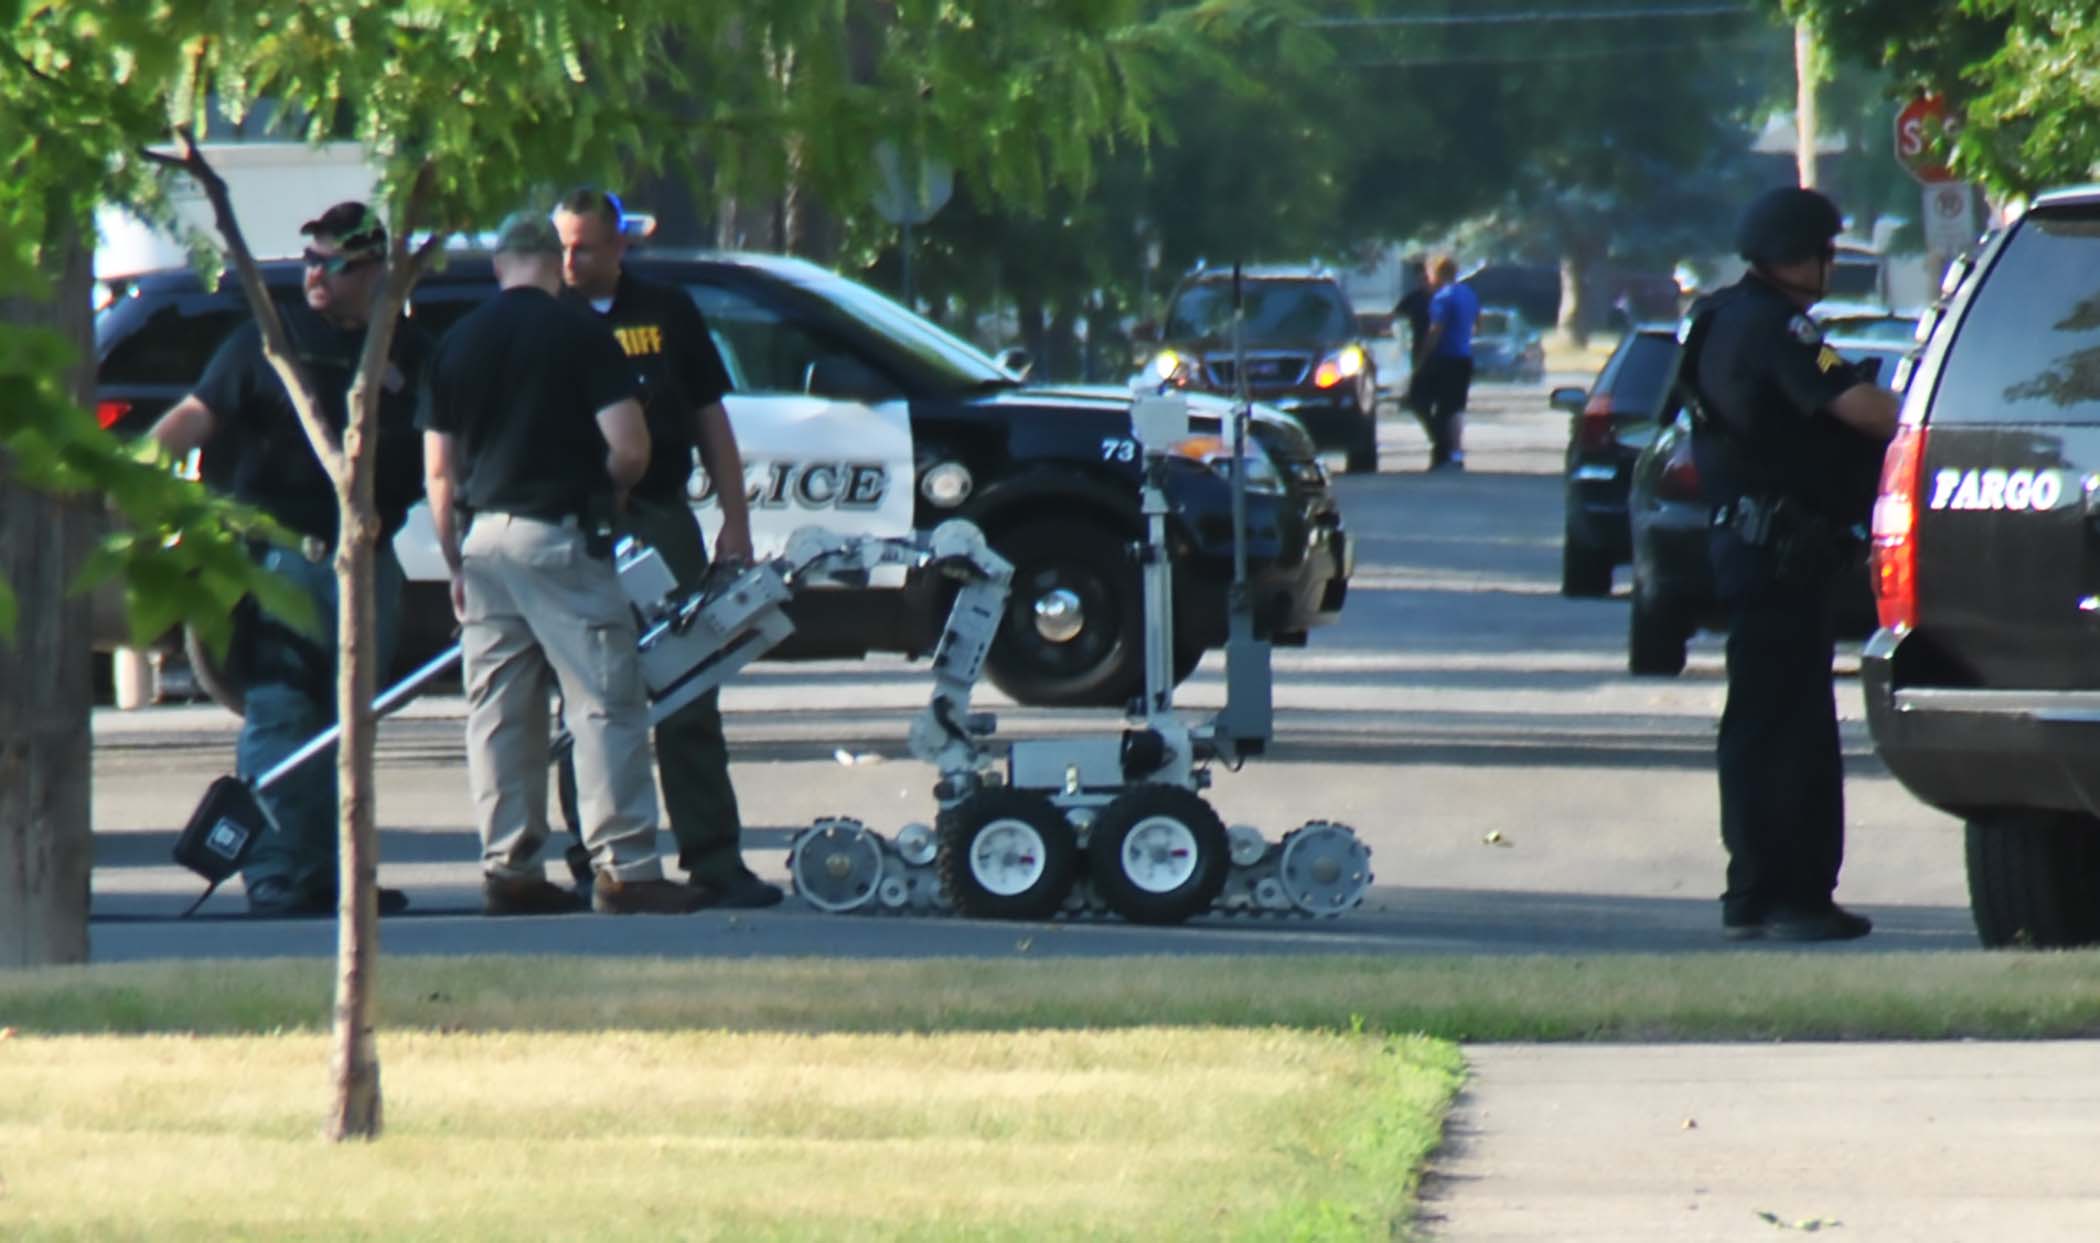 Police robot coming out of the apartment - photo by C.S. Hagen